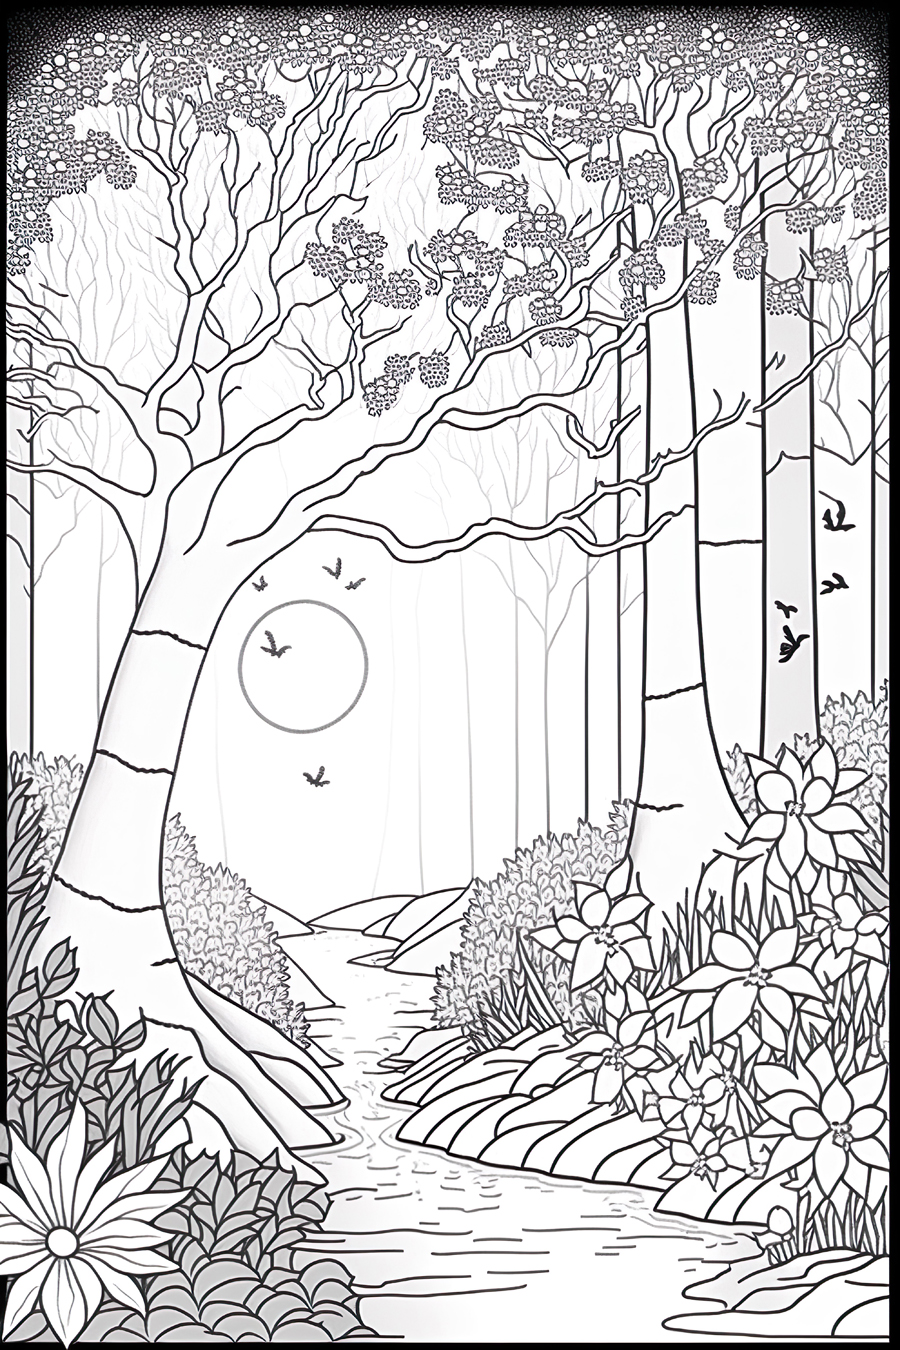 A black and white drawing of a forest with trees and birds.